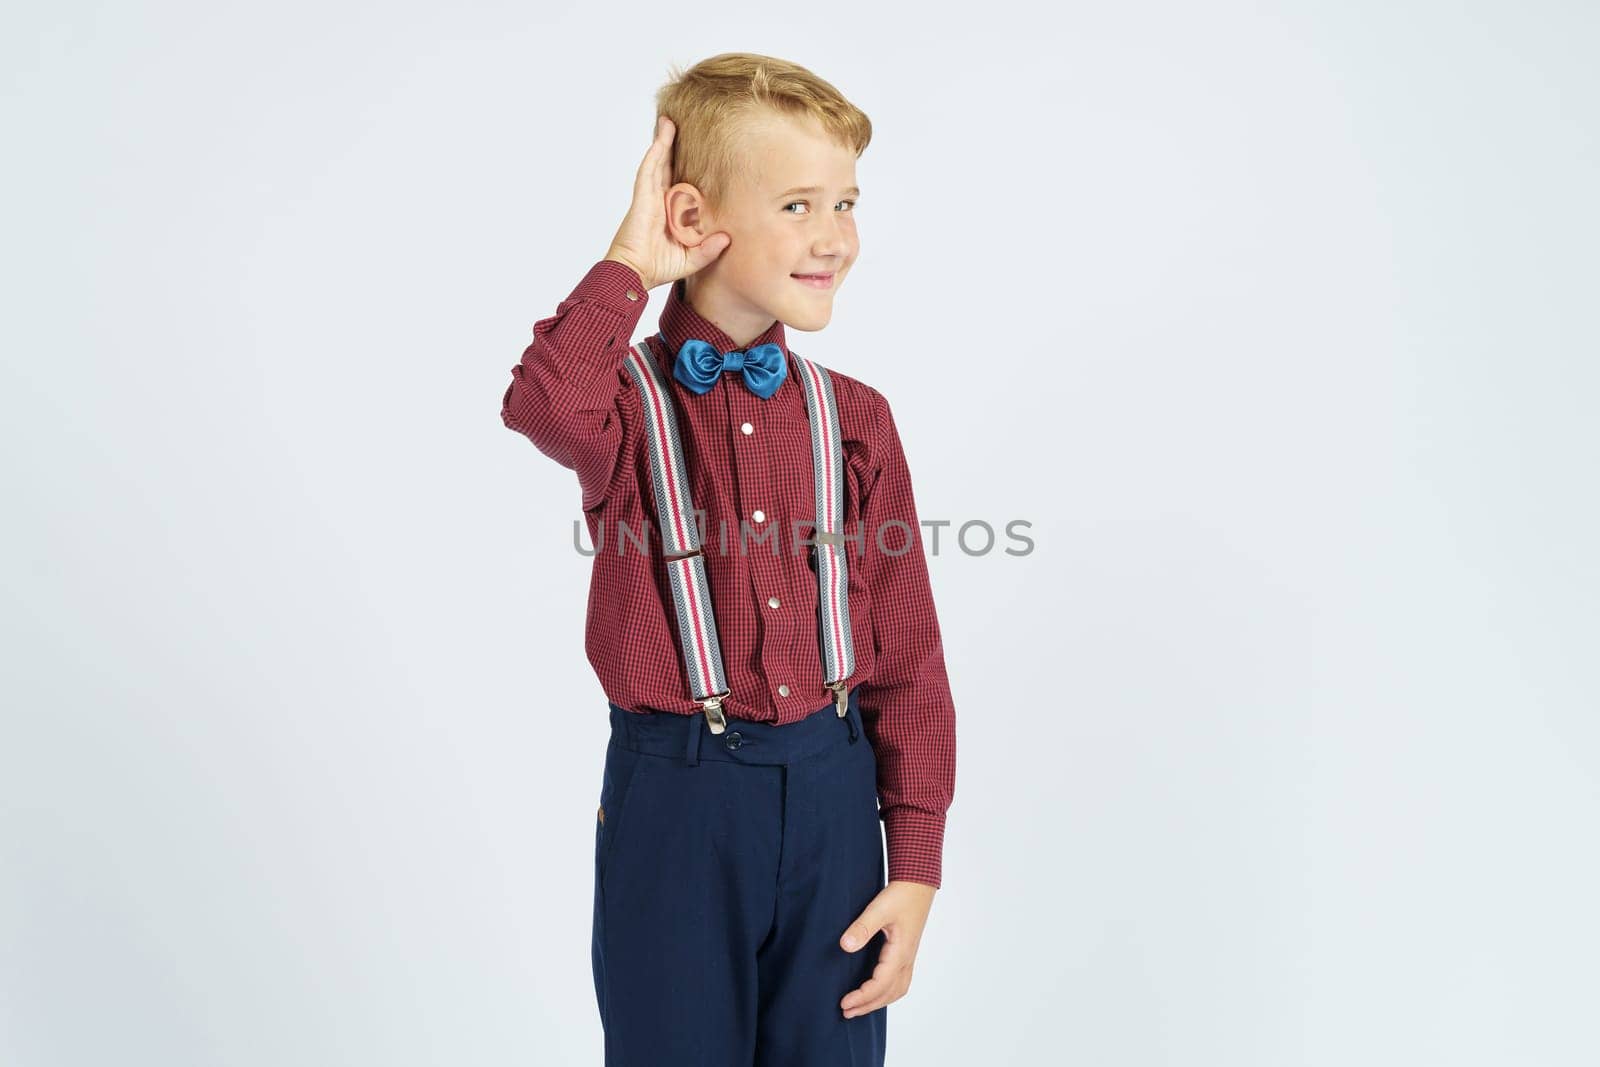 A portrait of a schoolboy who pretends to hear poorly. Isolated background. Education concept.